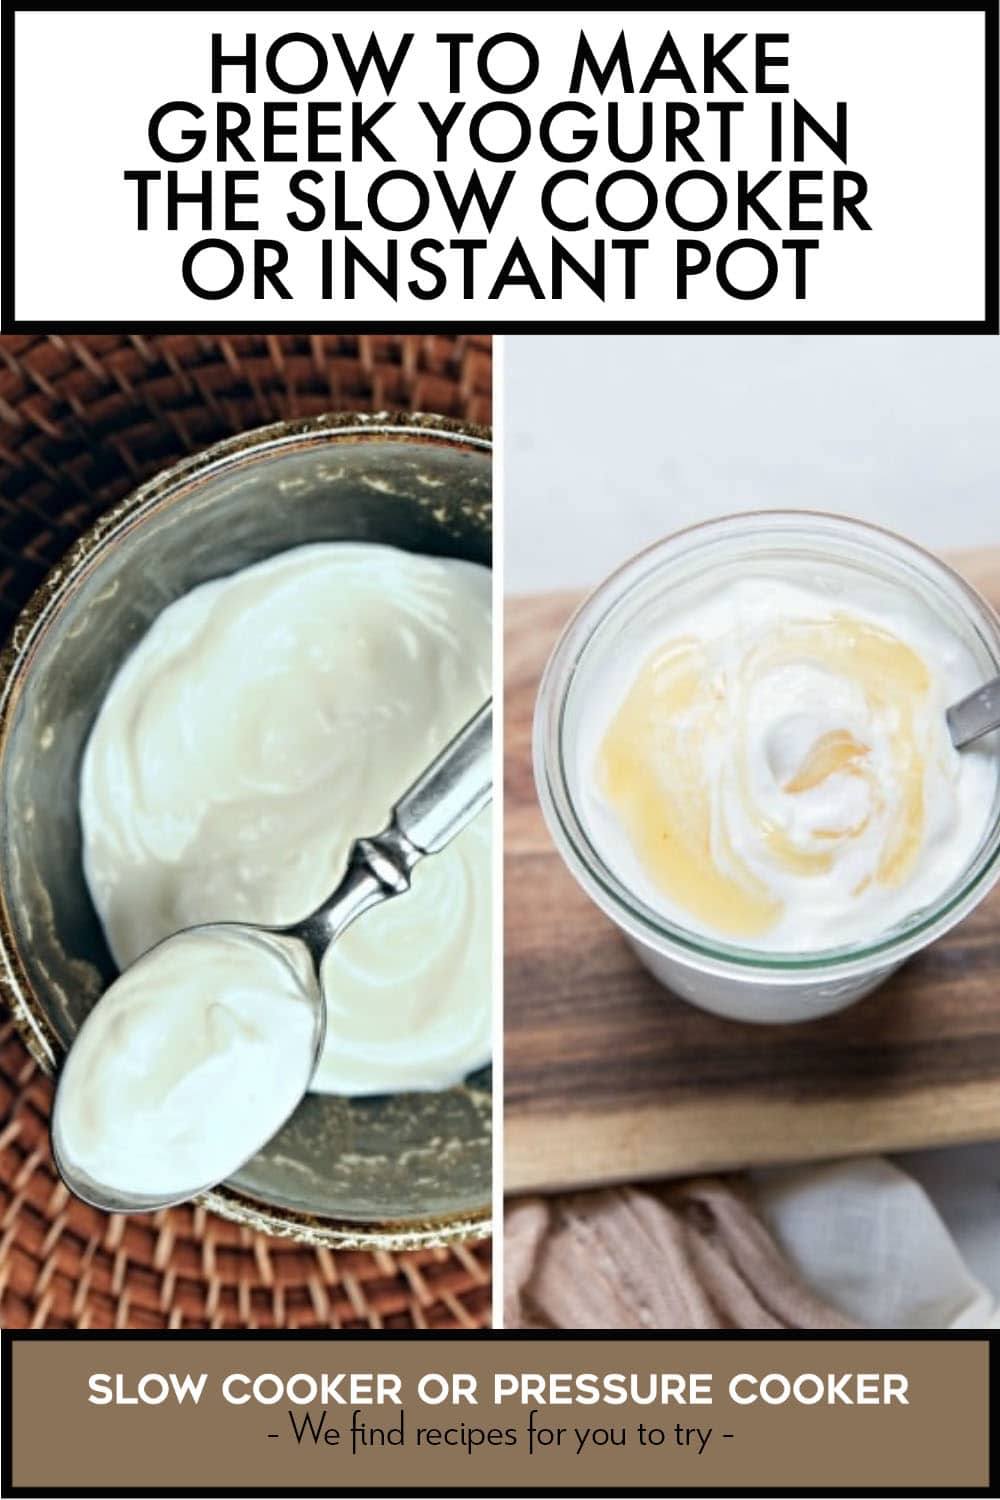 Pinterest image of How to Make Greek Yogurt in the Slow Cooker or Instant Pot